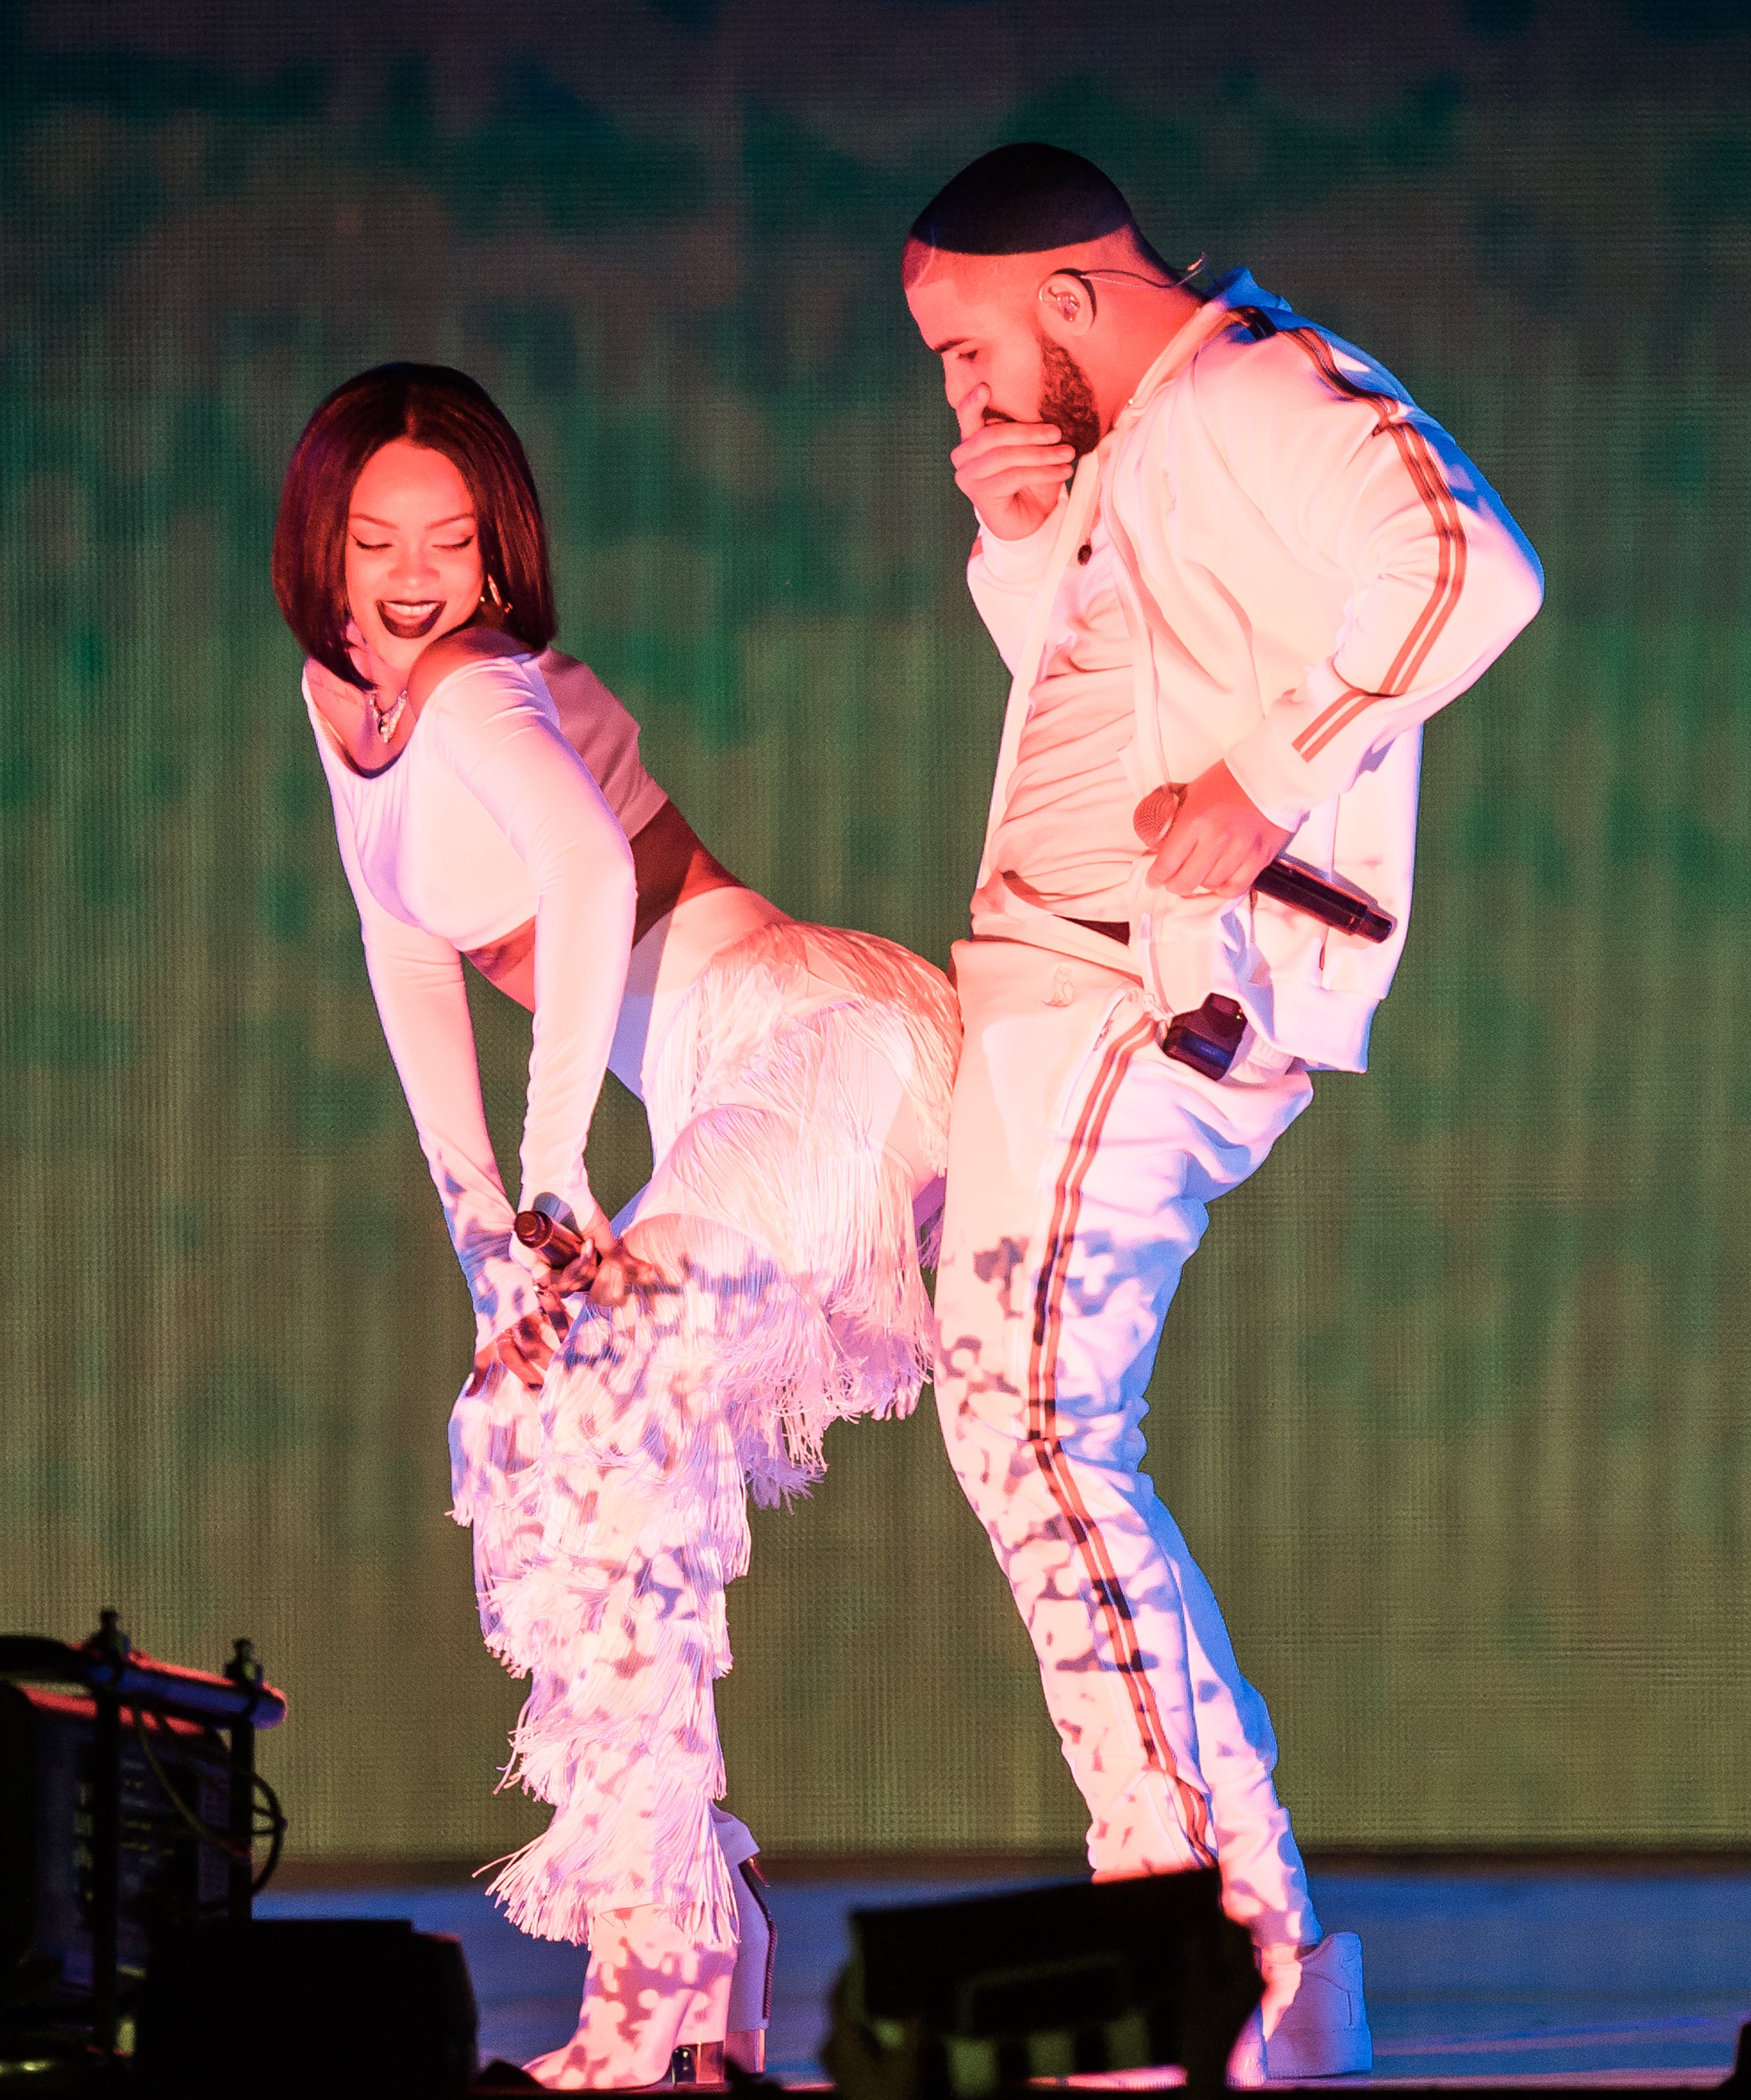 Drake Tells Rihanna She's 'Somebody I Have a Lot of Love For' On Her 29th Birthday